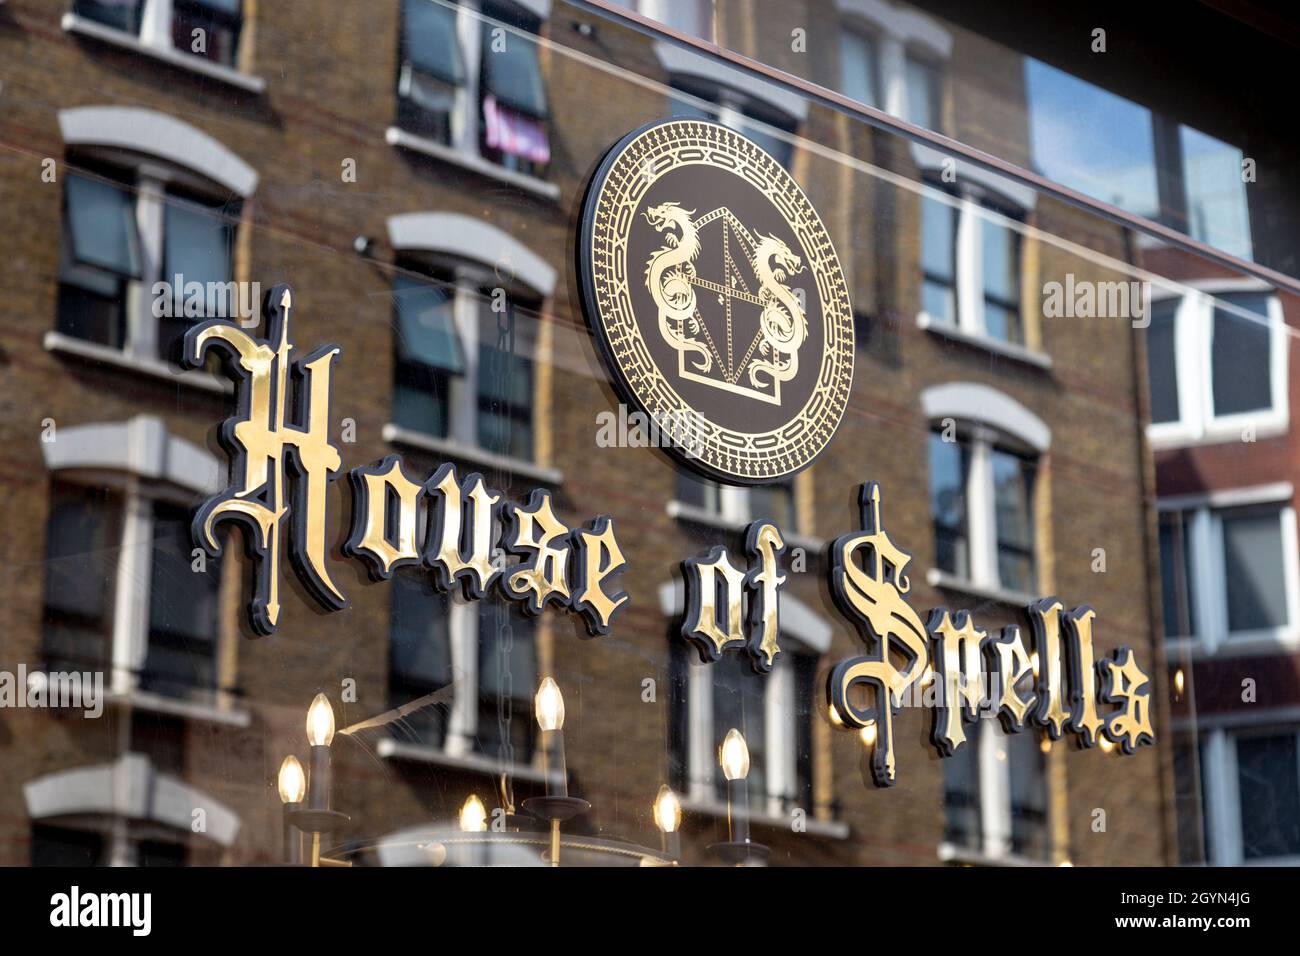 Harry Potter and fantasy themed store House of Spells, Charing Cross Road, London, UK Stock Photo